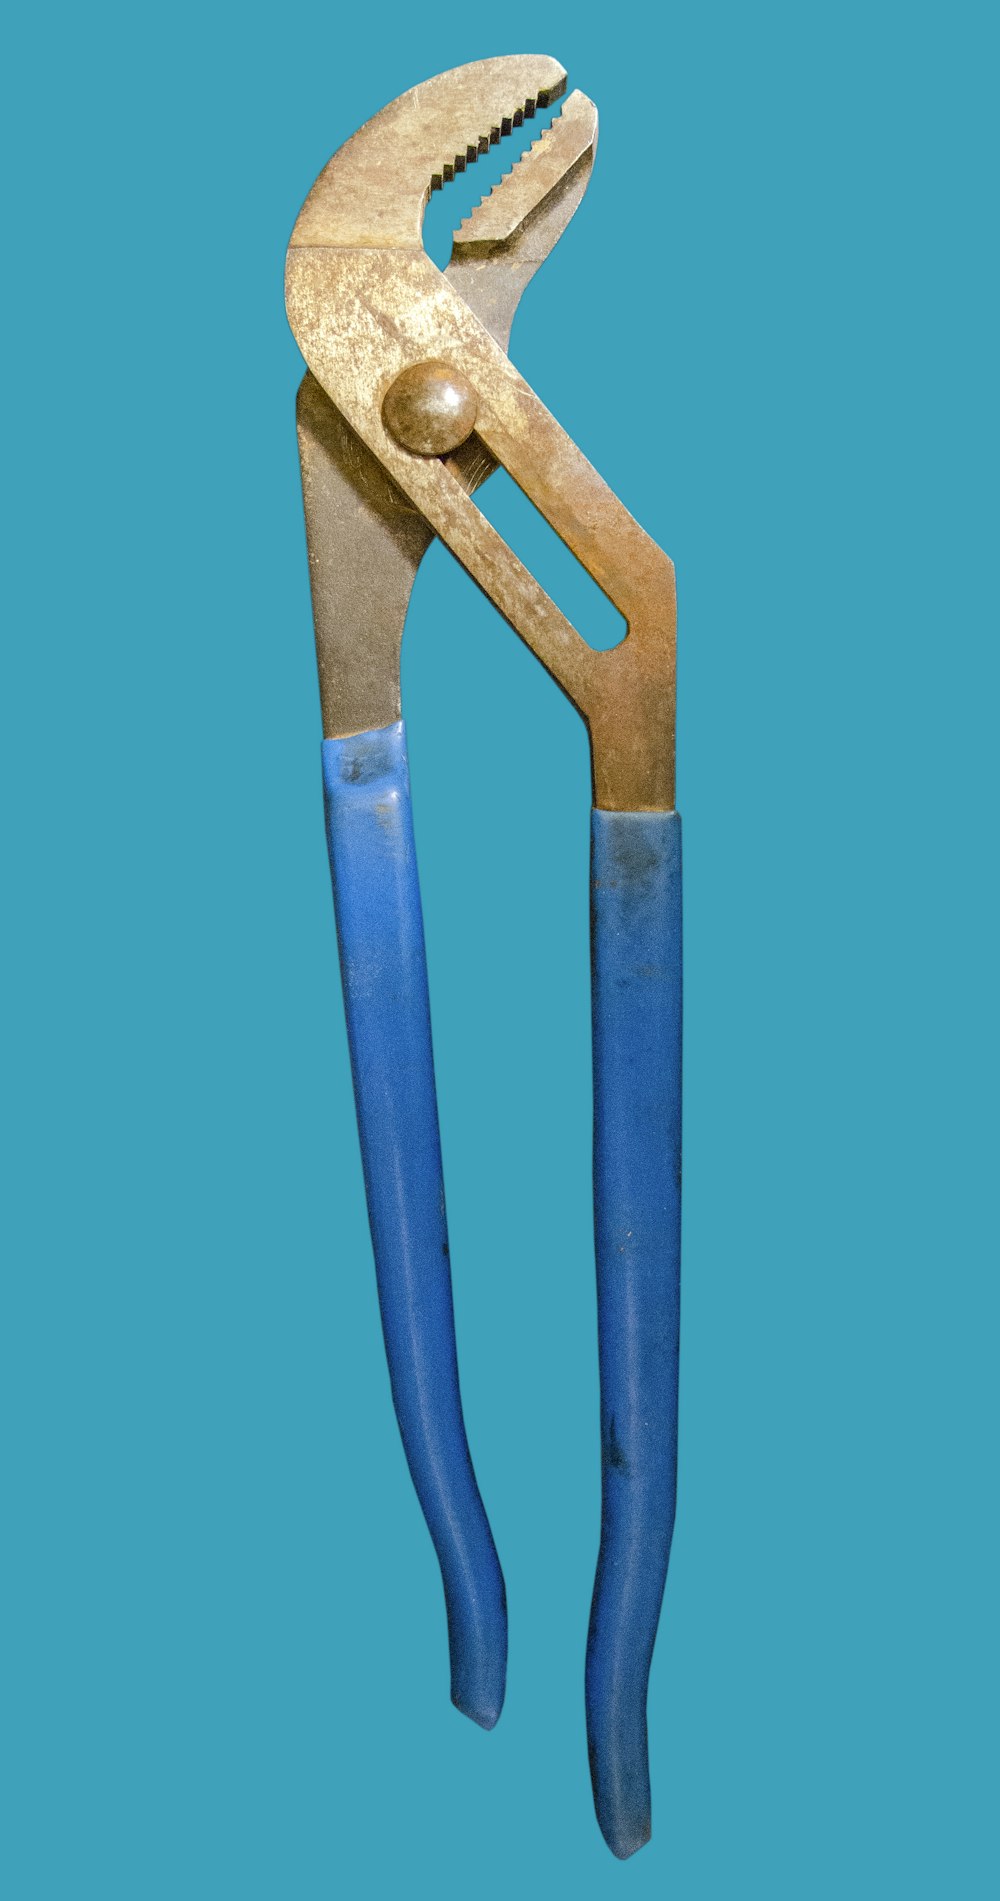 a pair of pliers with blue handles on a blue background